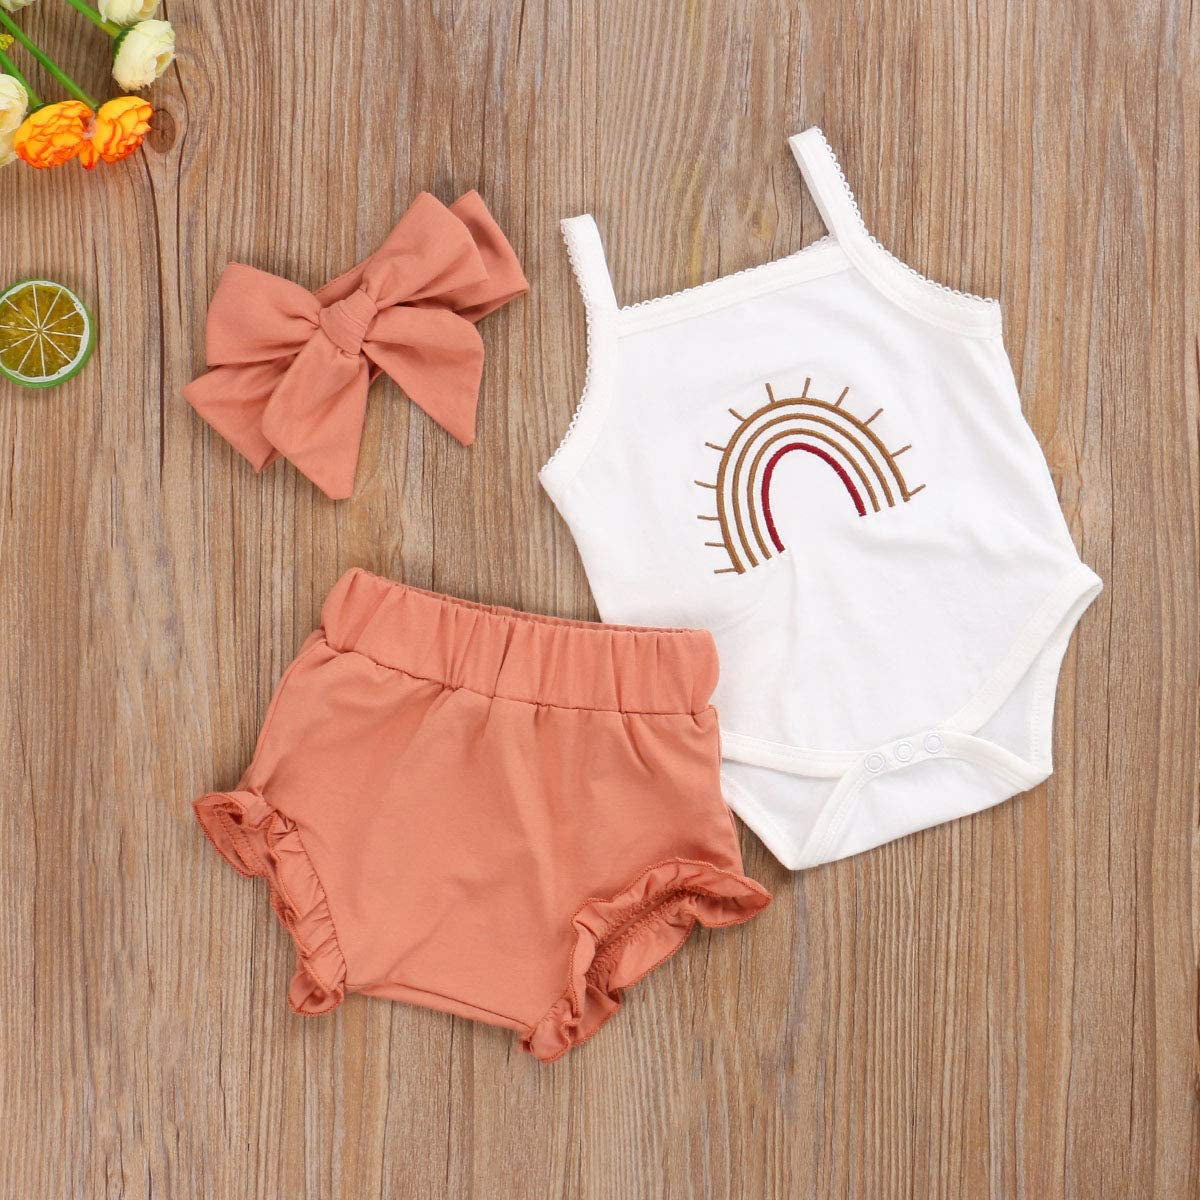 Newborn Baby Girl Clothes Cotton Infant Romper Headband Shorts Play Wear Summer Rainbow Outfits